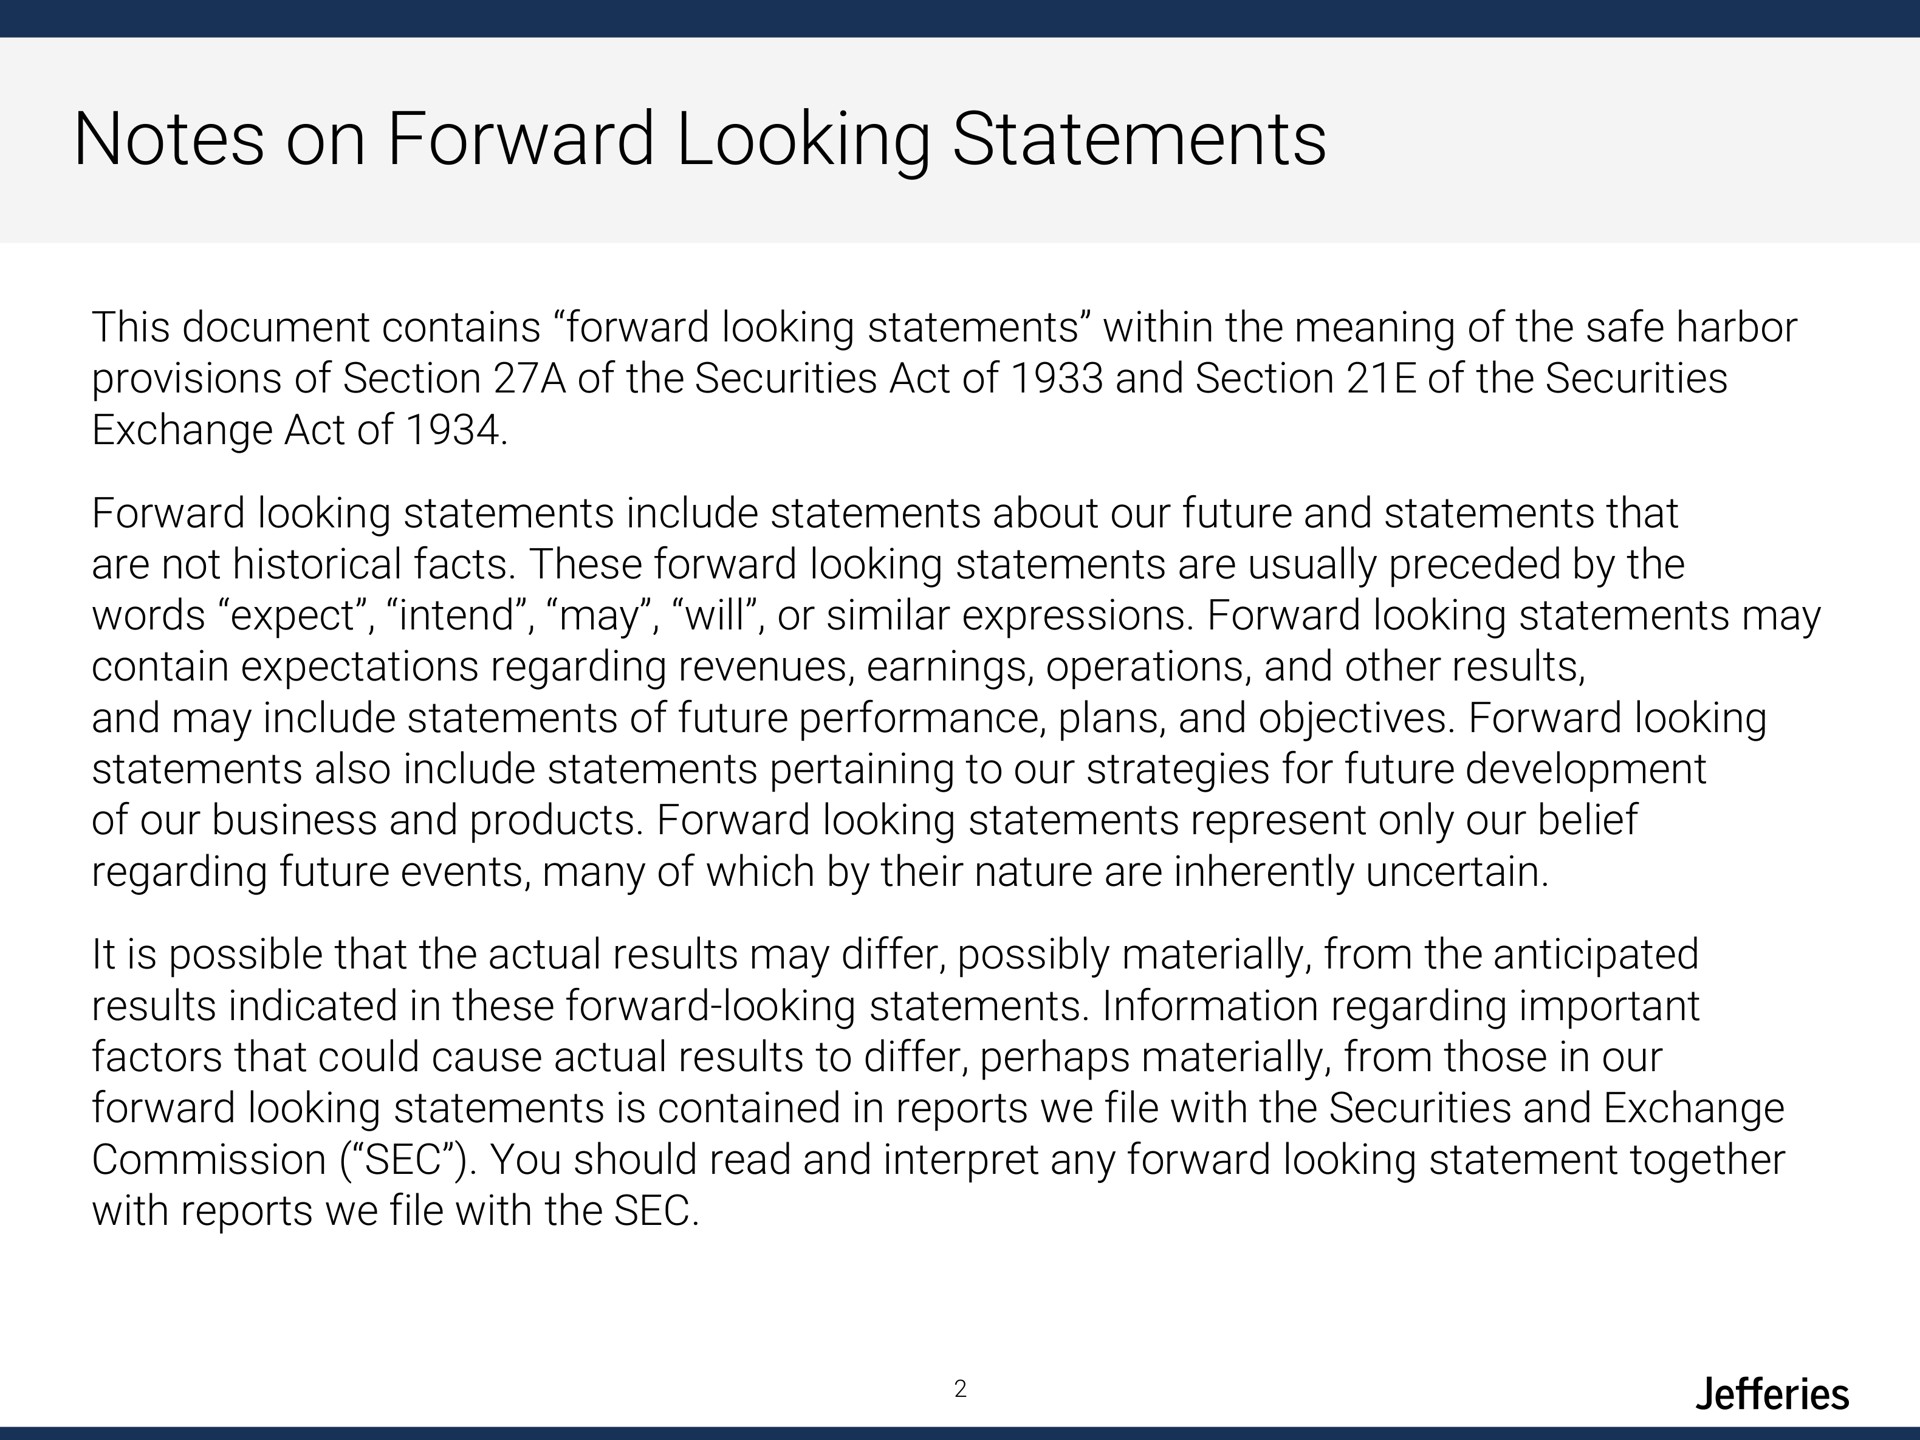 notes on forward looking statements | Jefferies Financial Group